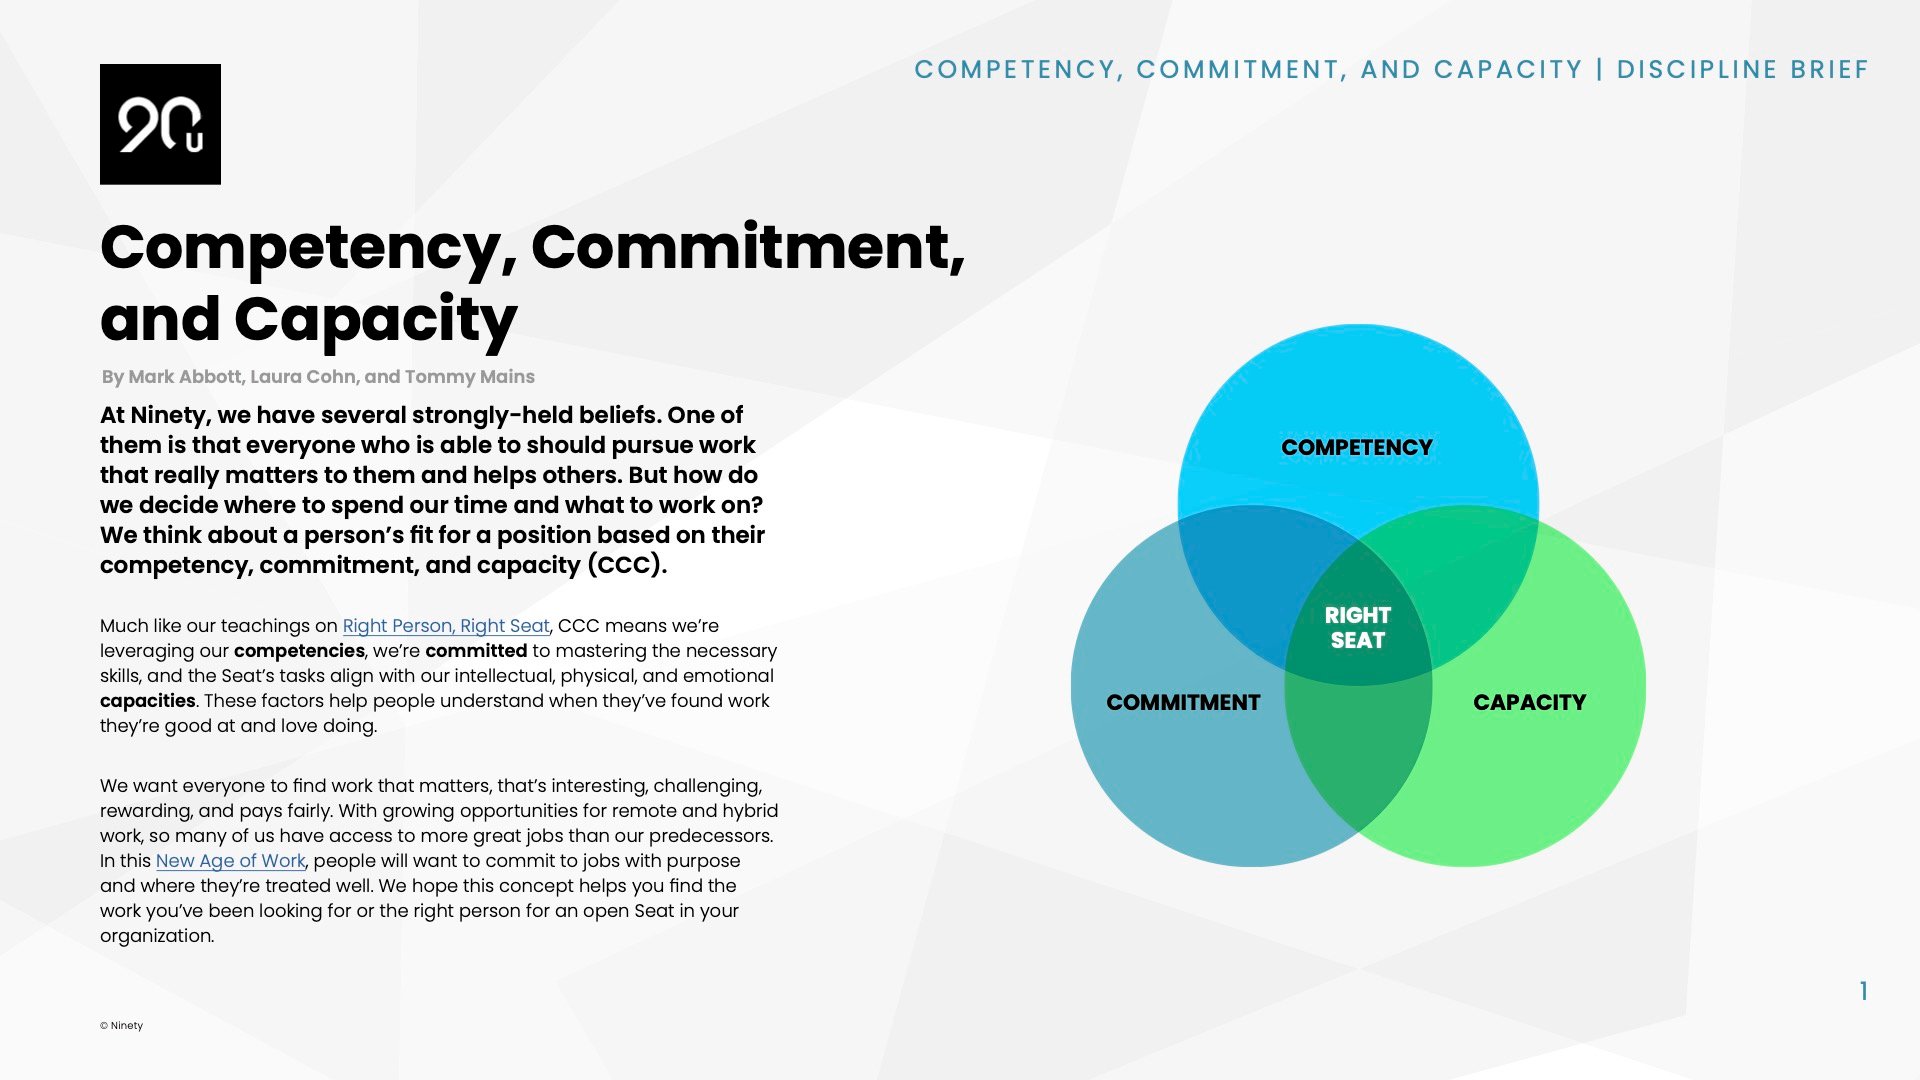 Competency, Commitment, and Capacity